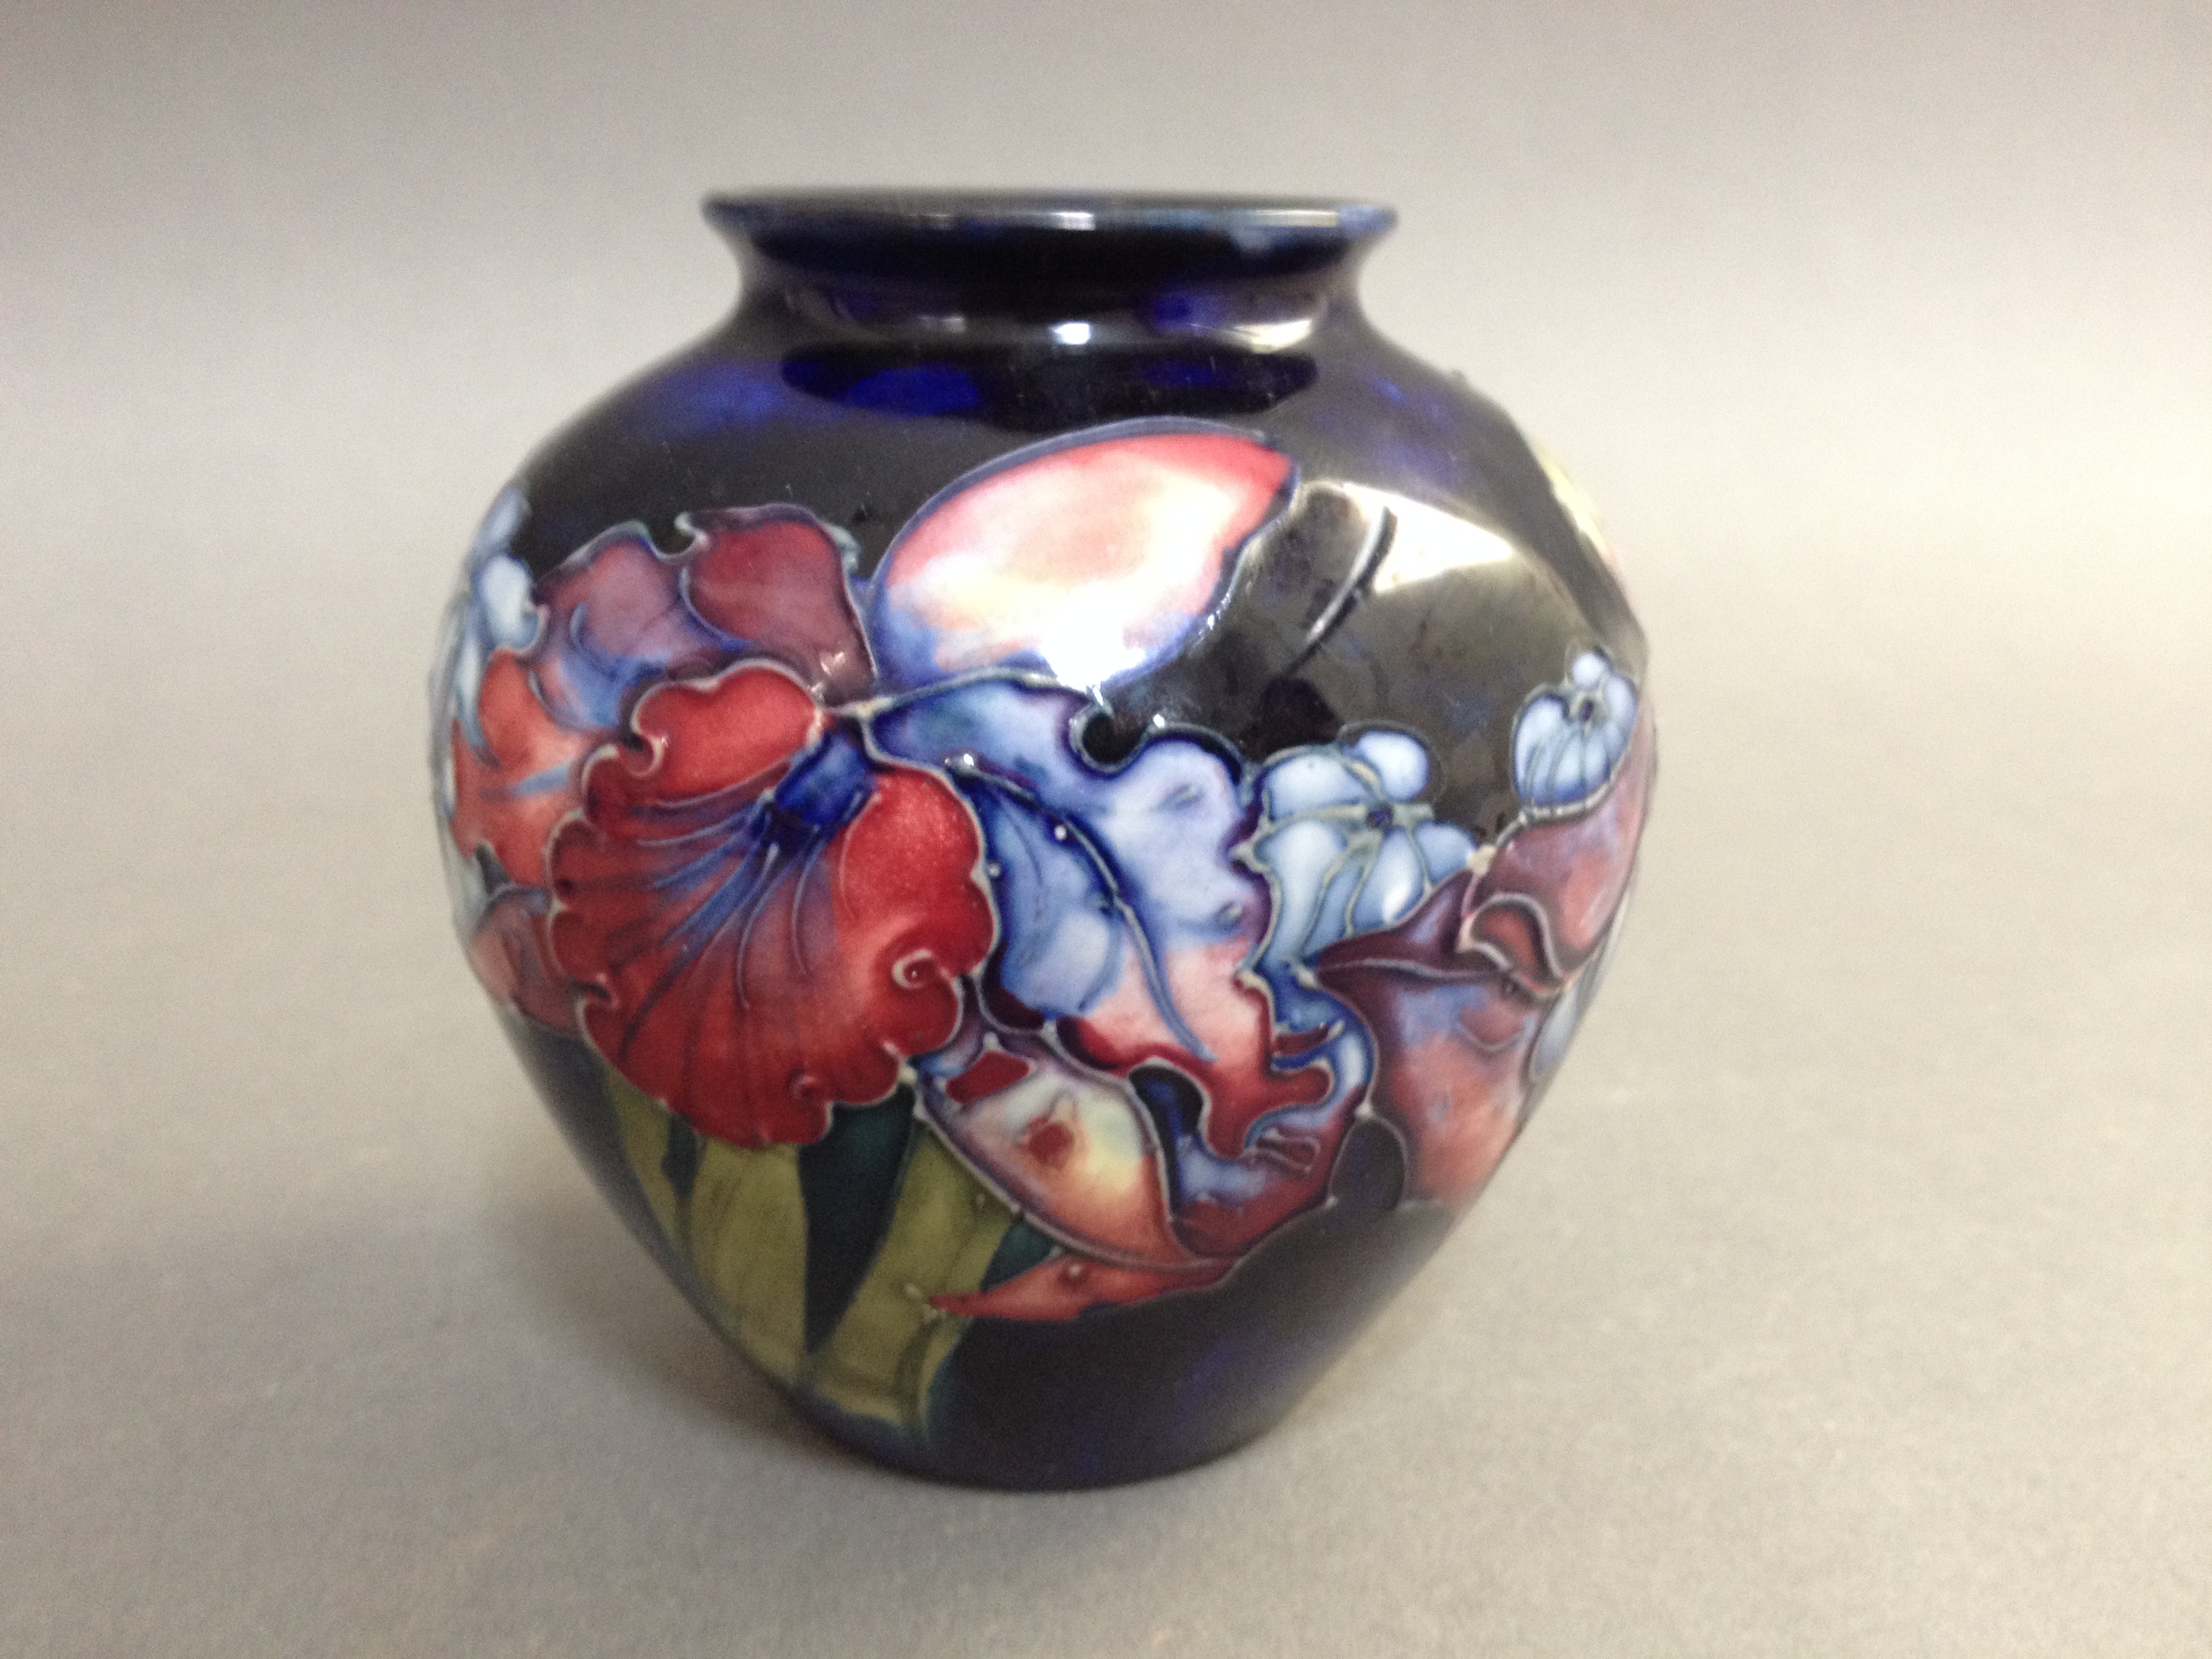 A Moorcroft pottery squat vase, height 9.5cm. Condition - good, no damage/repair, general wear.